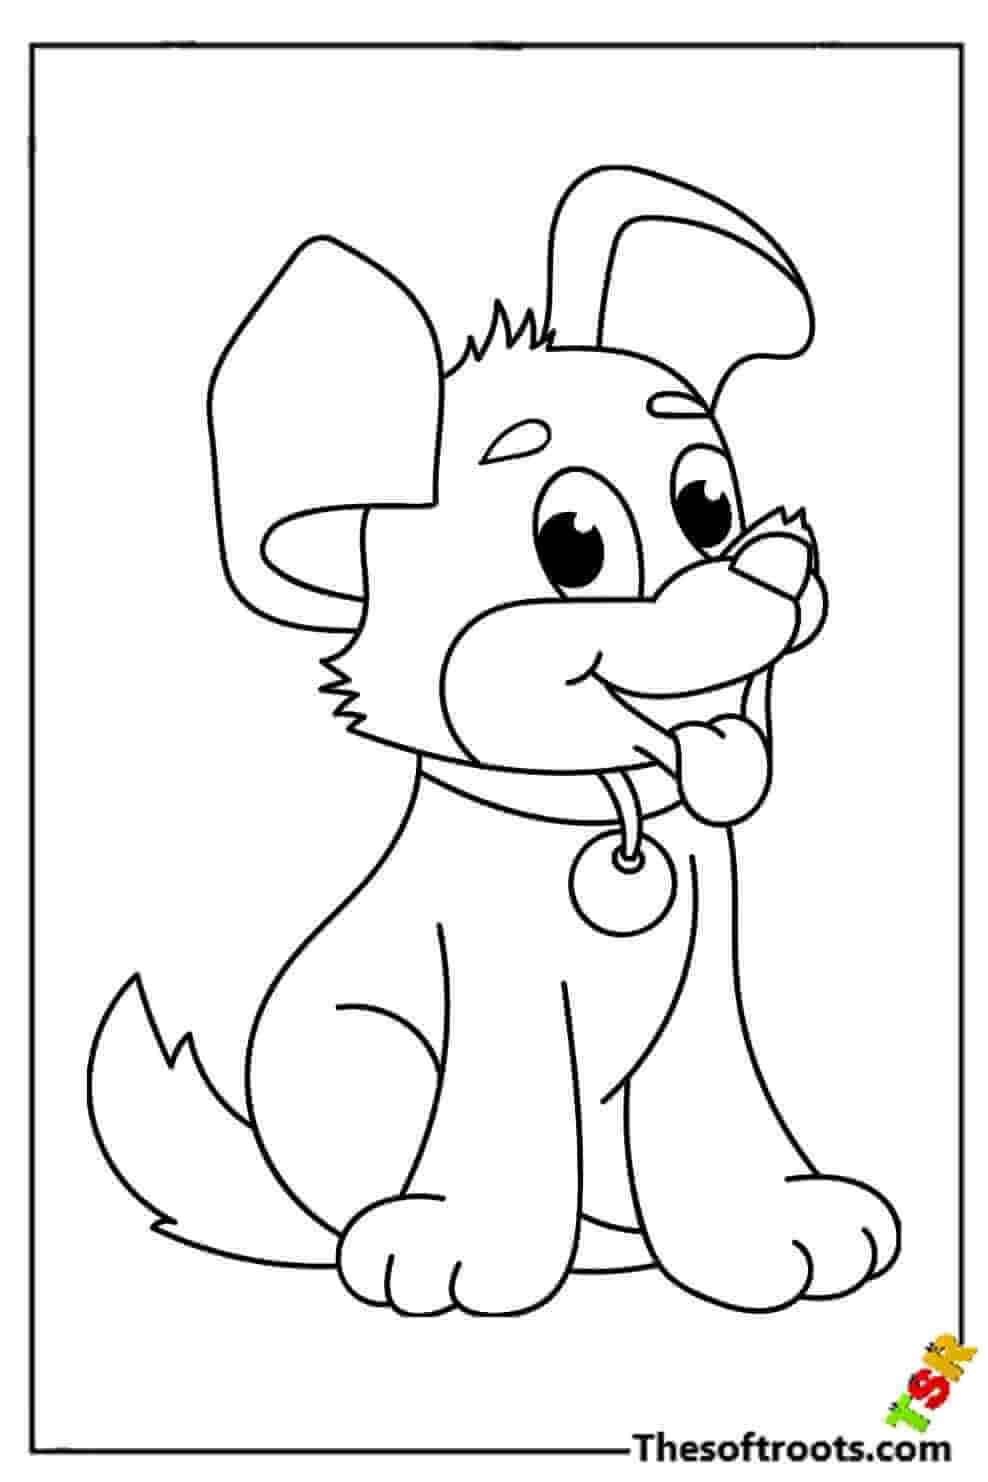 Simple puppy coloring pages